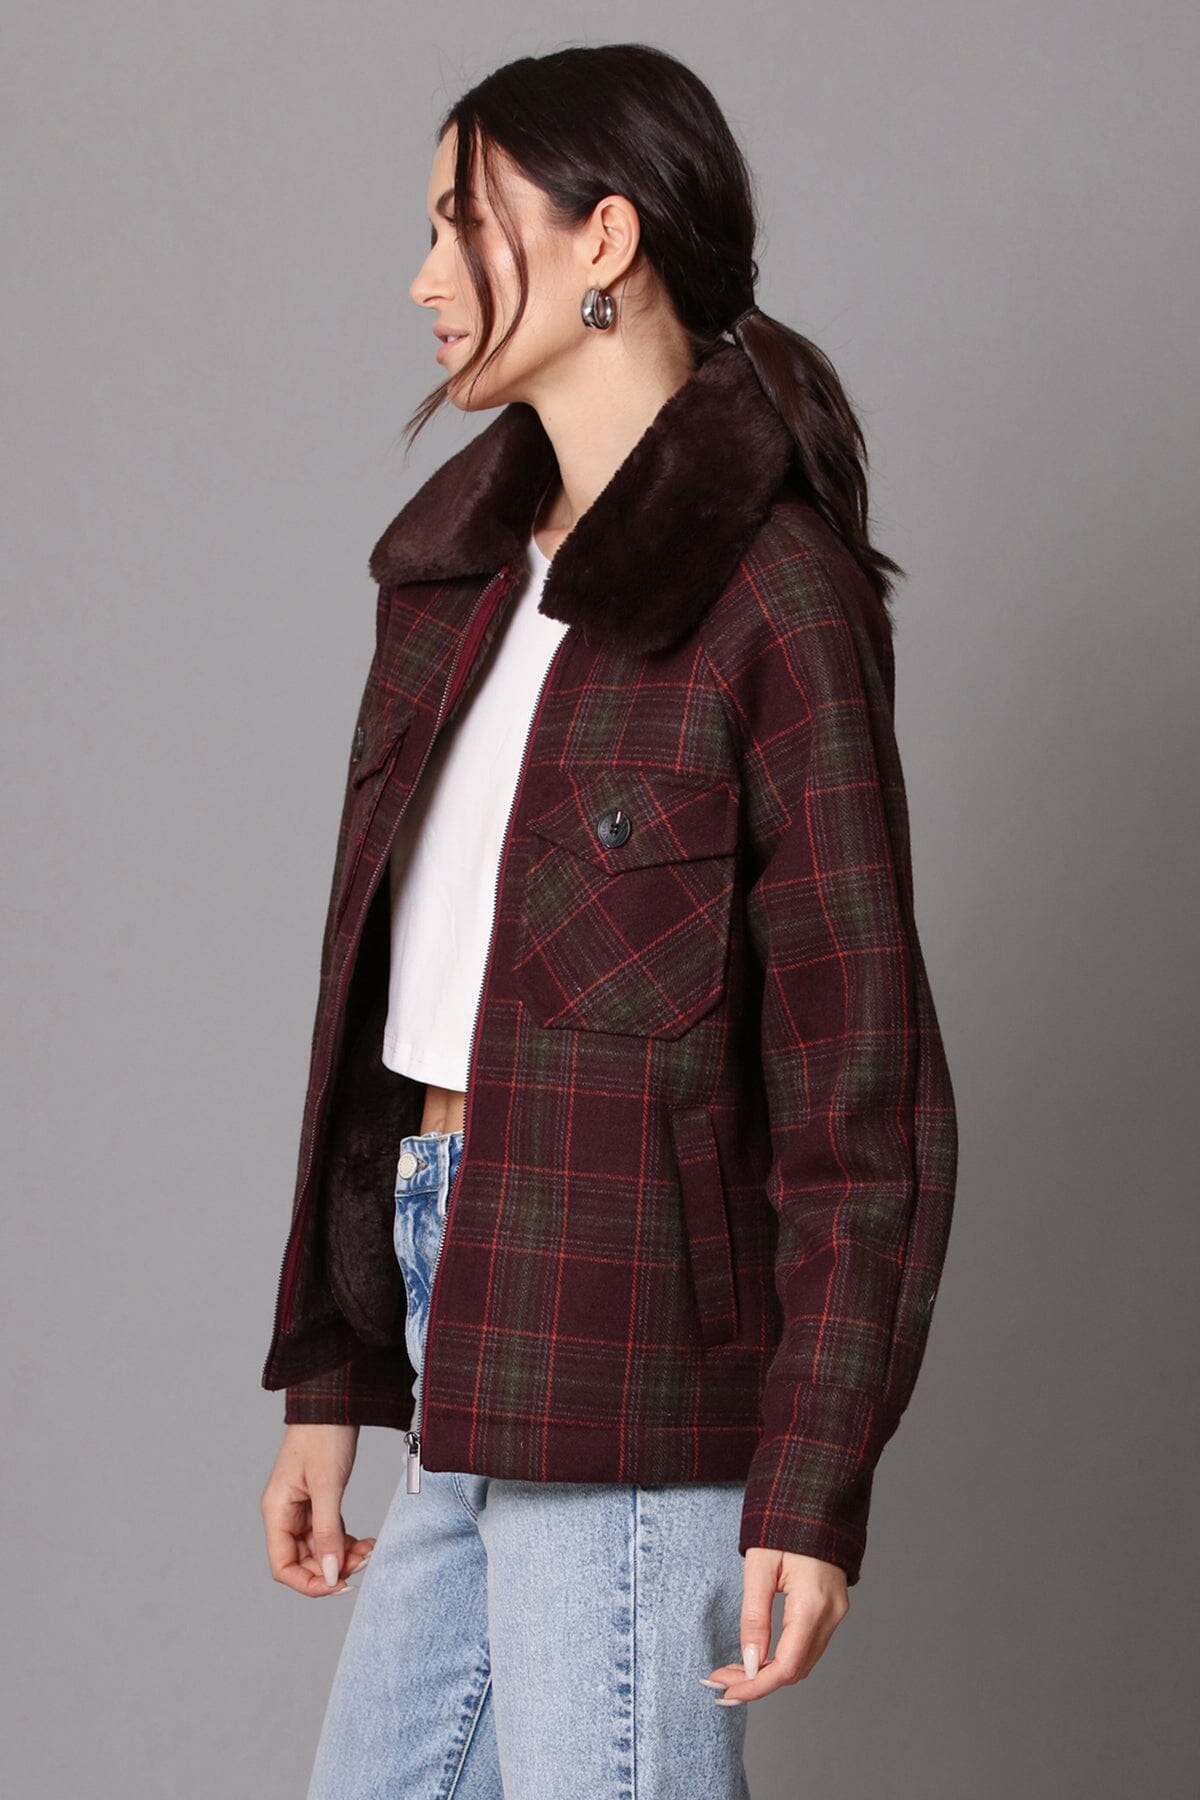 Maroon plaid zip-front faux fur collared jacket coat - women's figure flattering cute outerwear for fall